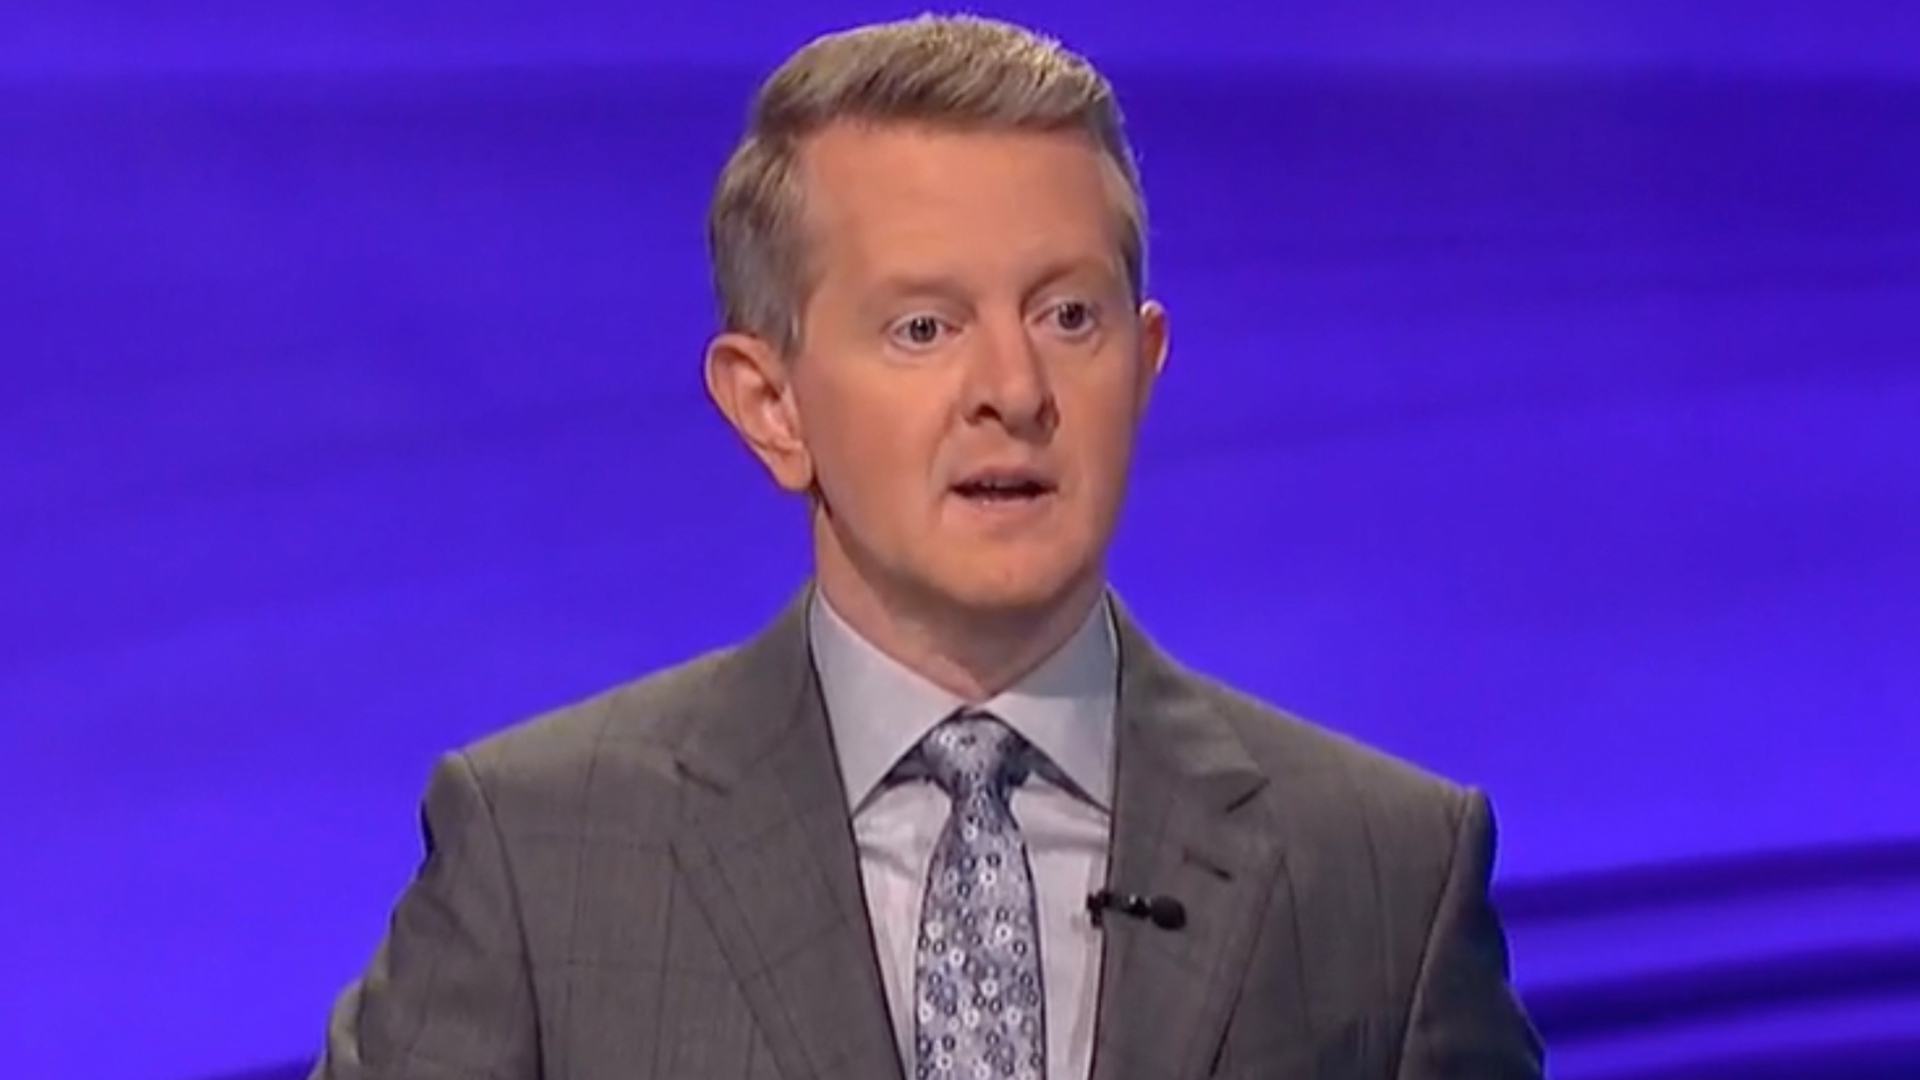 Jeopardy! player mocked for ‘brain fart’ answer to ‘obvious’ clue as fans spot Ken Jennings’ move that ‘tripped him up’ [Video]